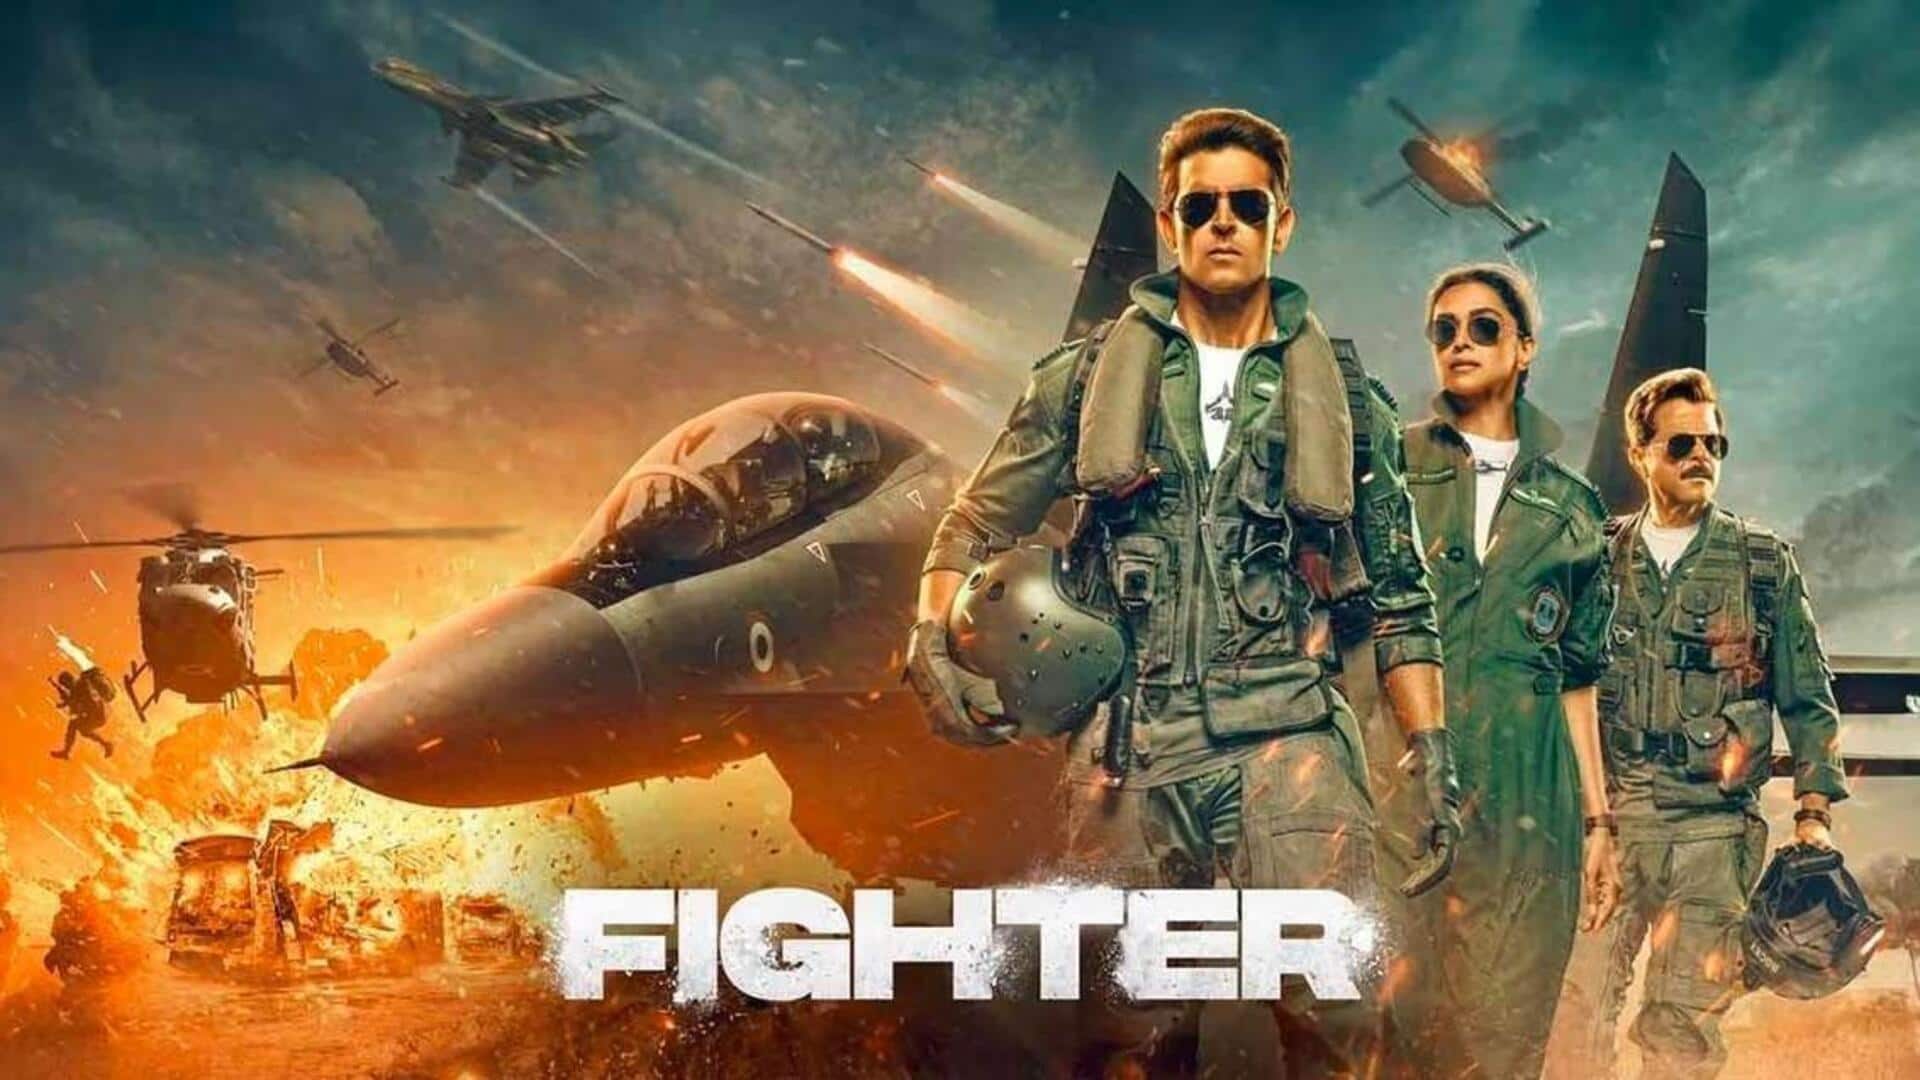 Box office: 'Fighter' crosses Rs. 100cr milestone in four-day run